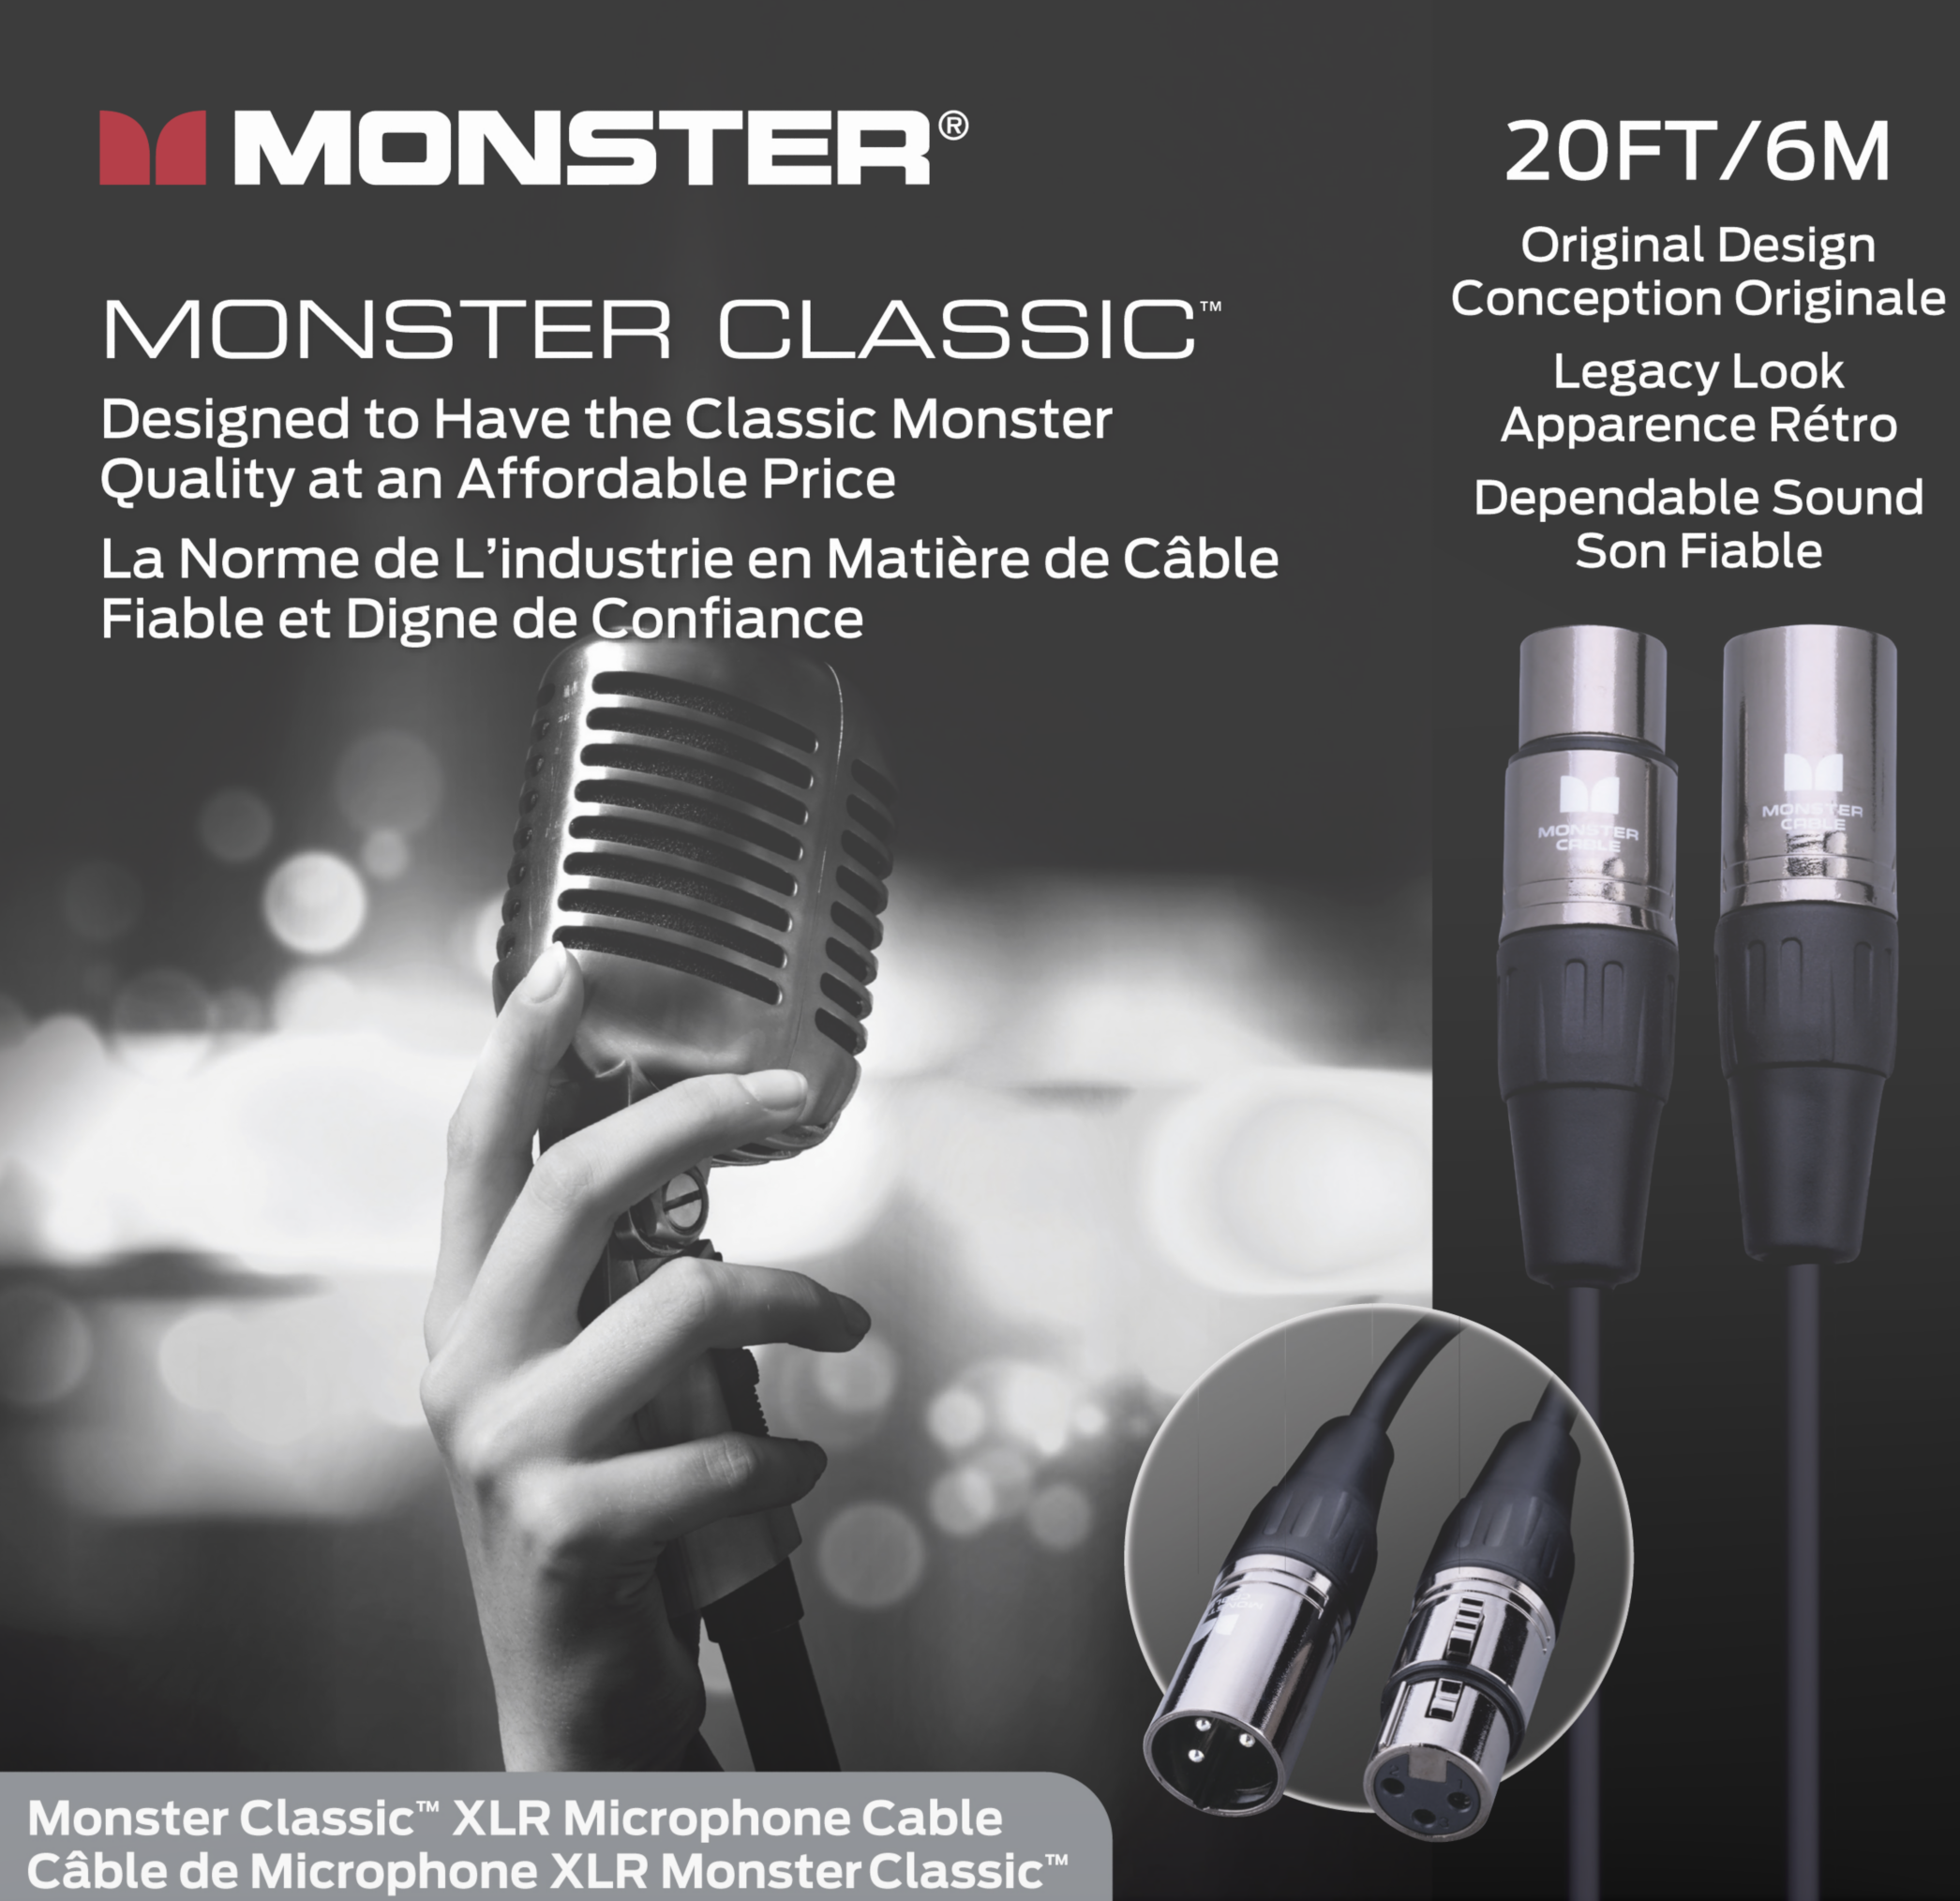 Monster® Prolink Classic™ Microphone Cable - HIENDGUITAR 20ft(6m) 20ft(6m) Monstercable Cable